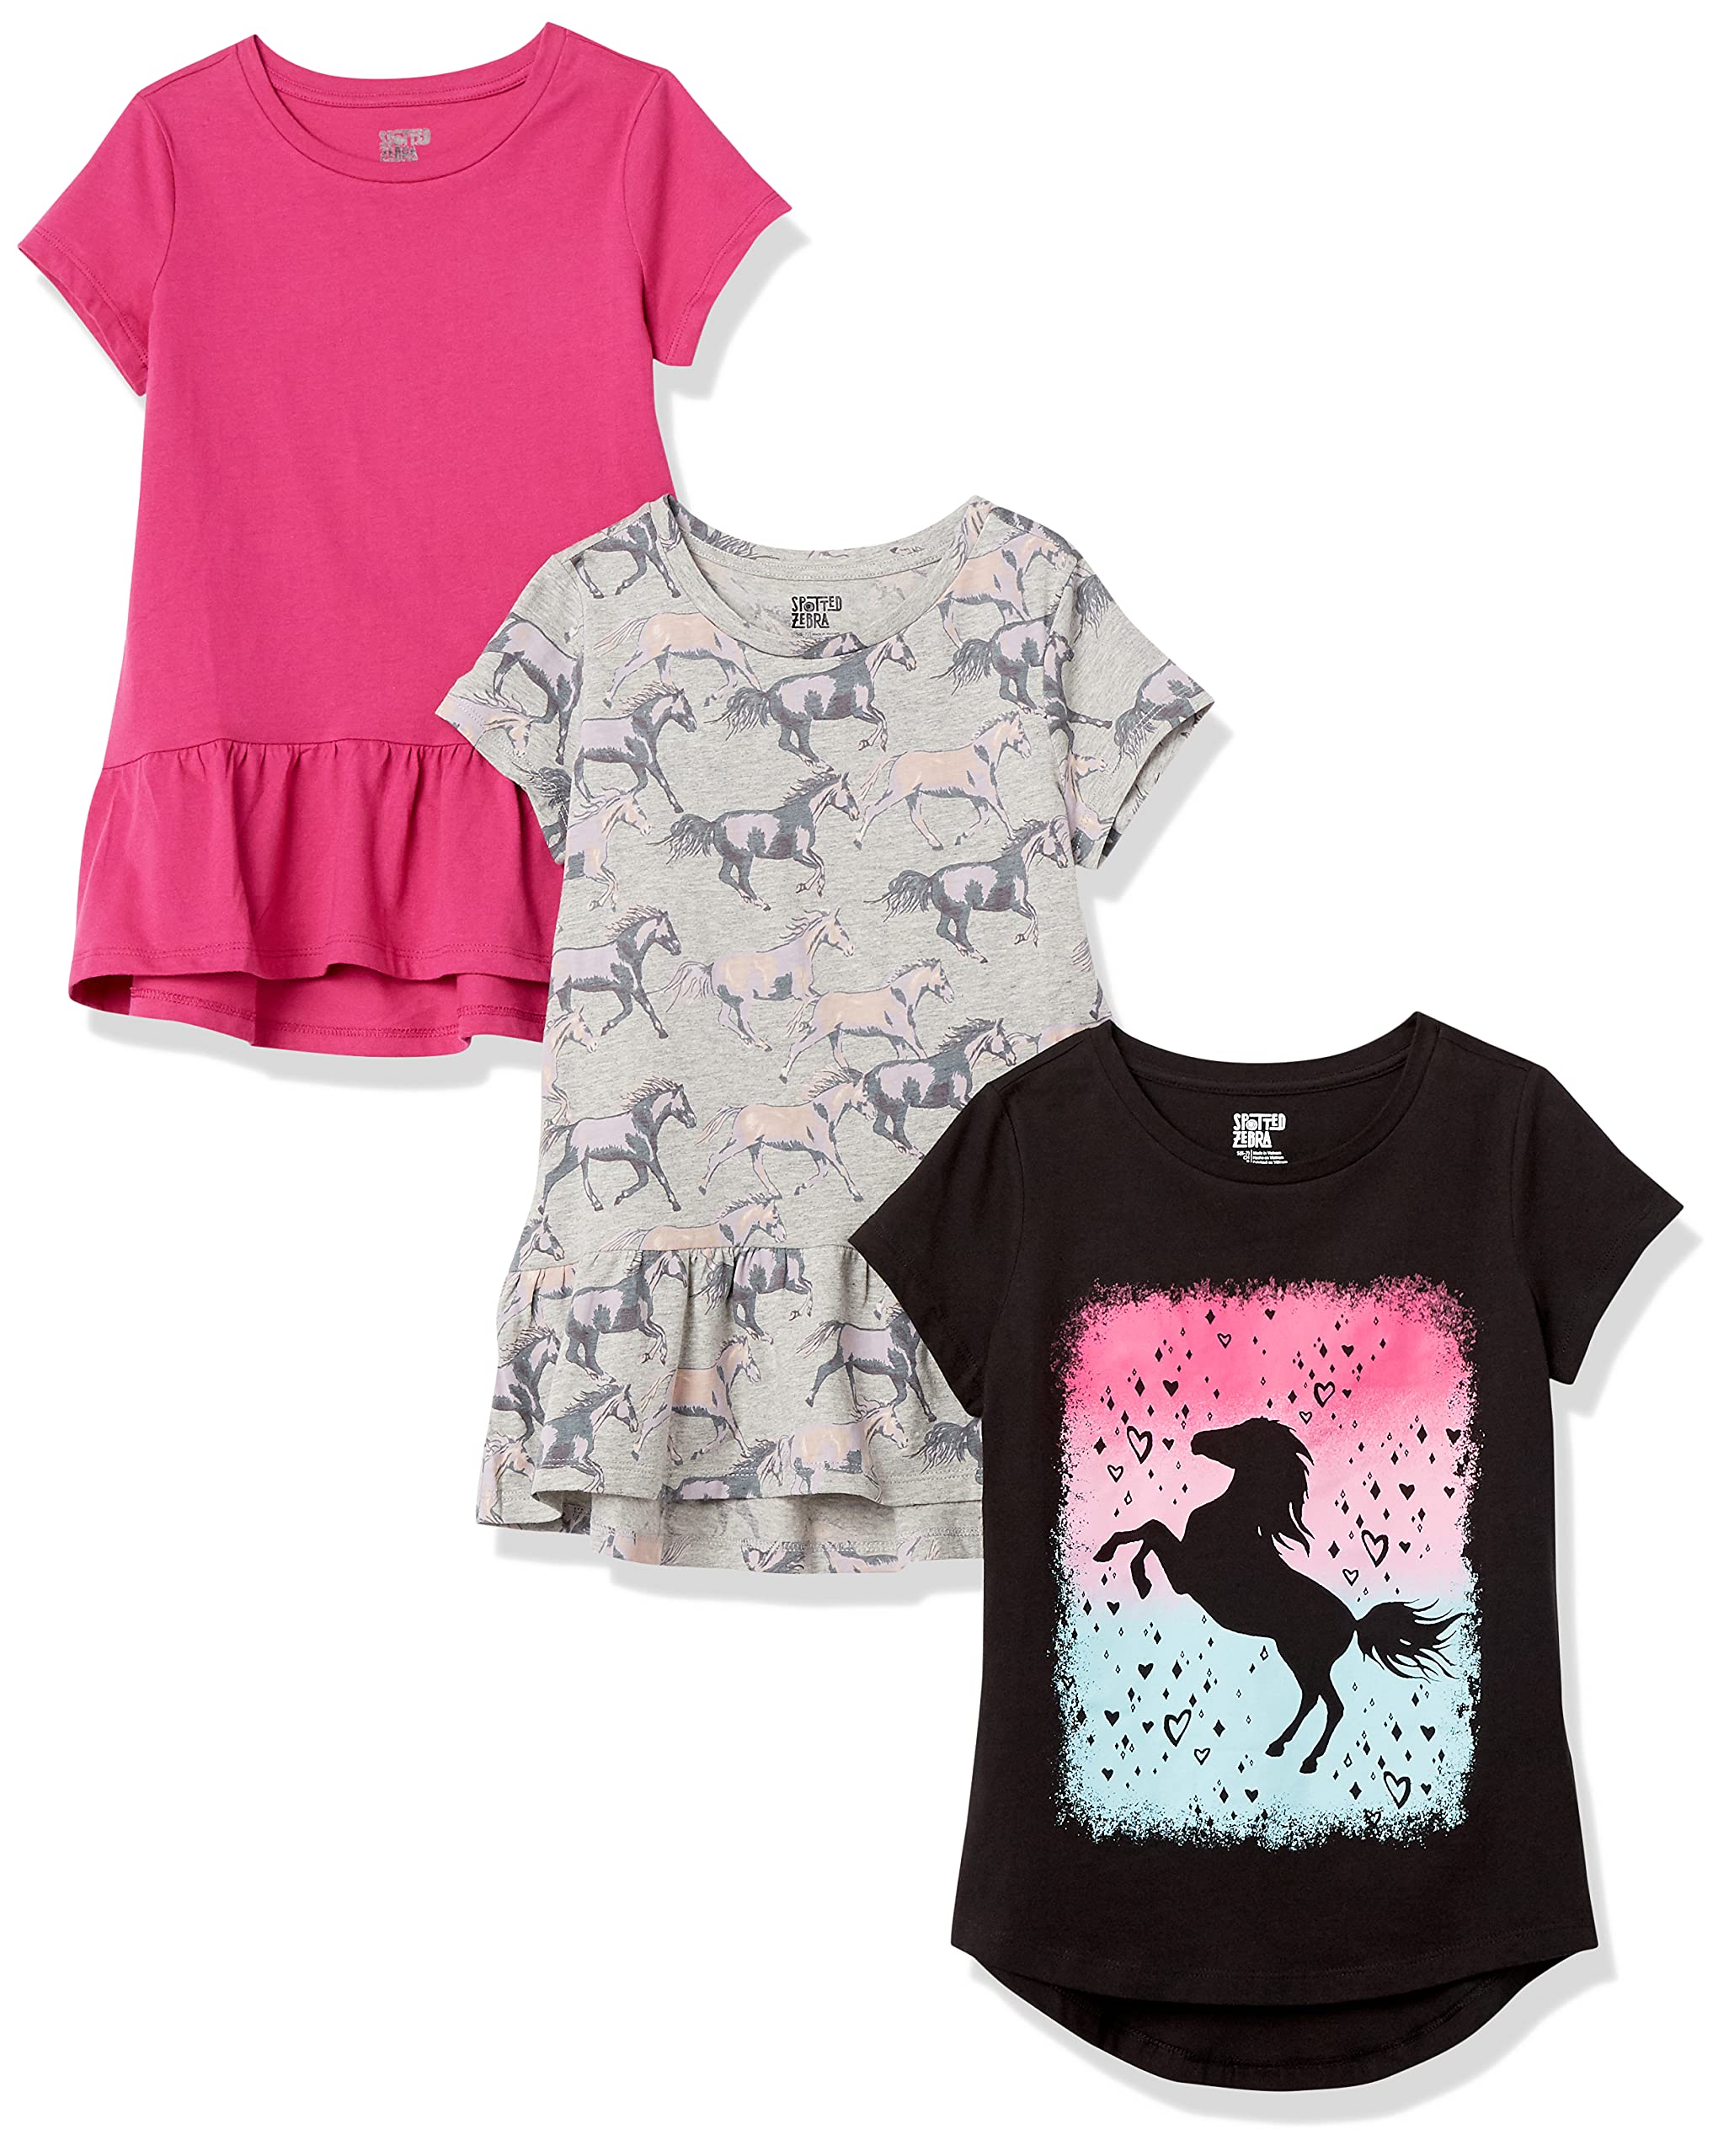 Spotted Zebra Girls and Toddlers' Short-Sleeve and Sleeveless Tunic Tops, Multipacks